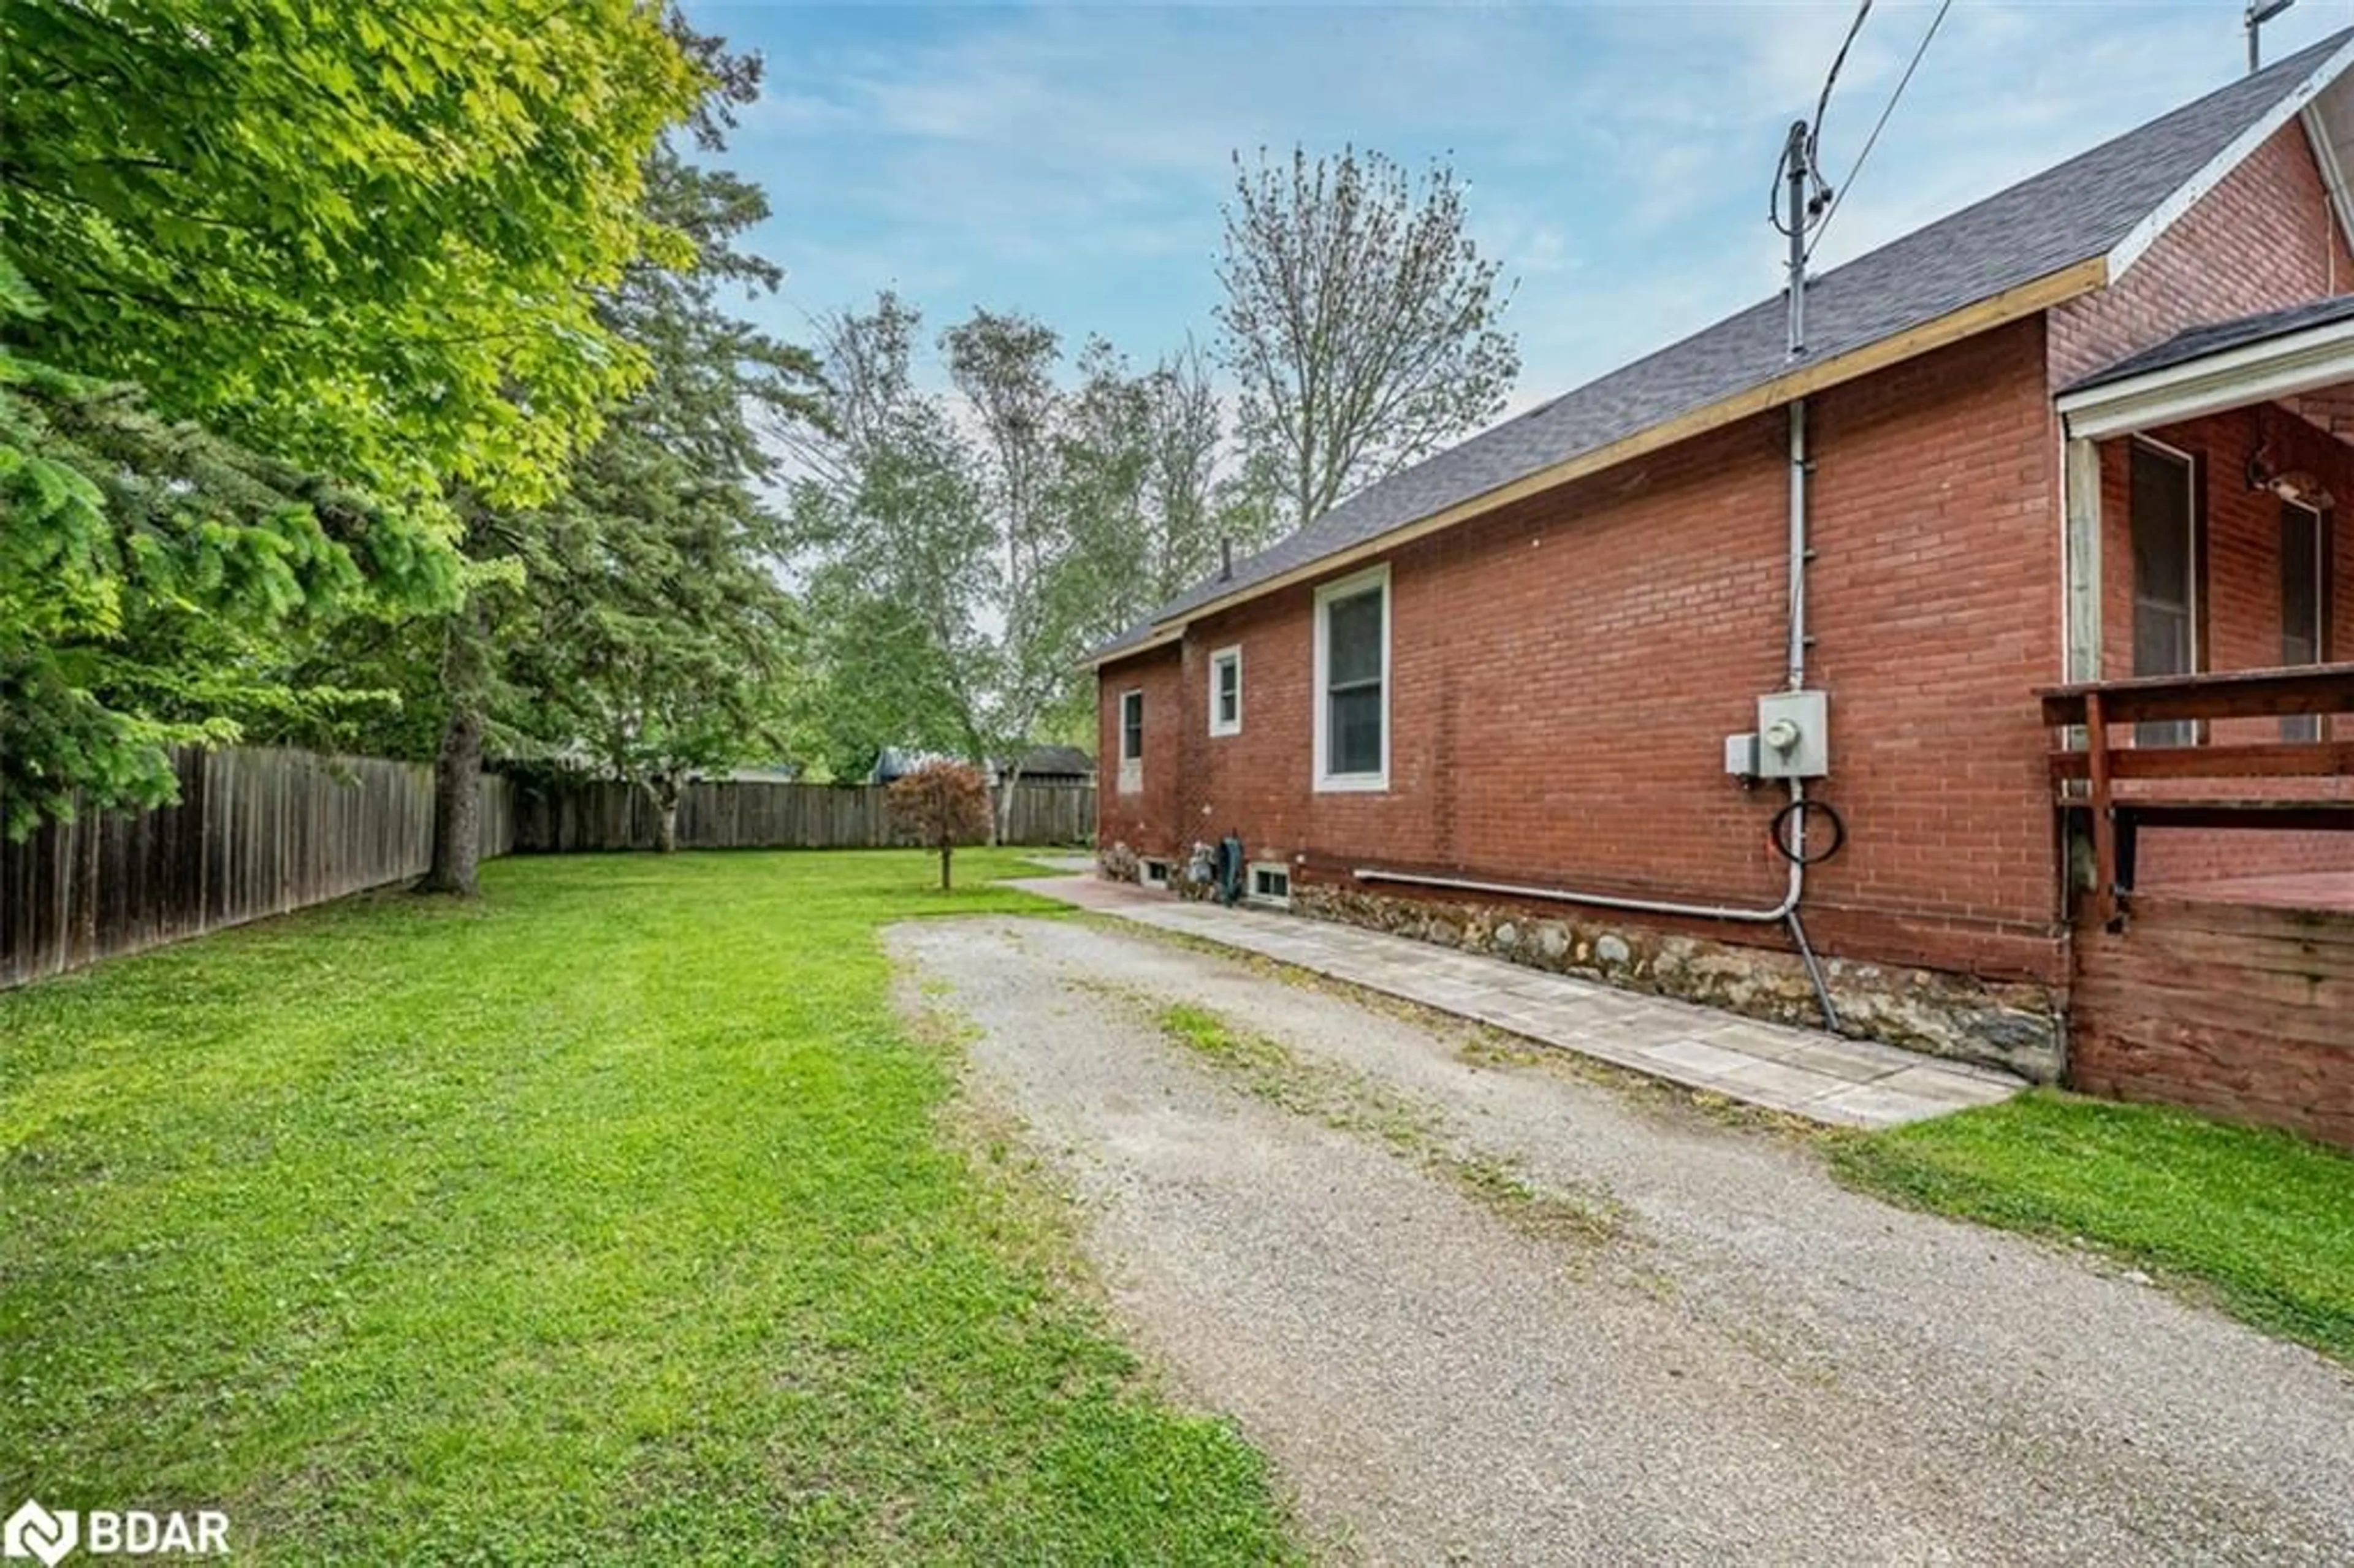 Home with brick exterior material for 87 Wellington St, Alliston Ontario L9R 1G7